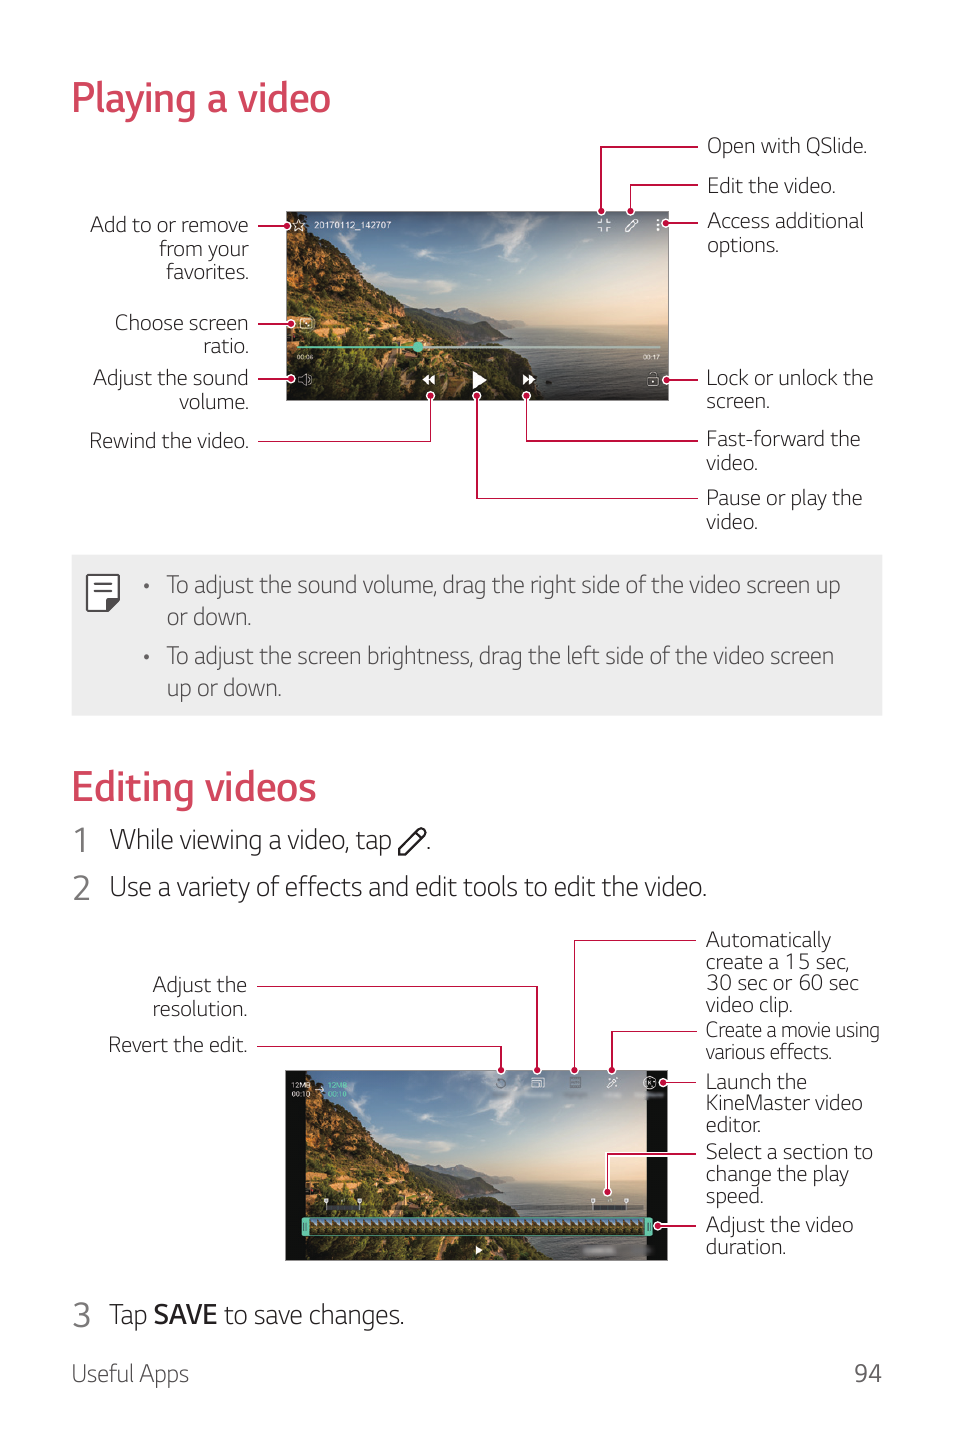 Playing a video, Editing videos, While viewing a video, tap | Tap save to save changes | LG G6 H872 User Manual | Page 95 / 183